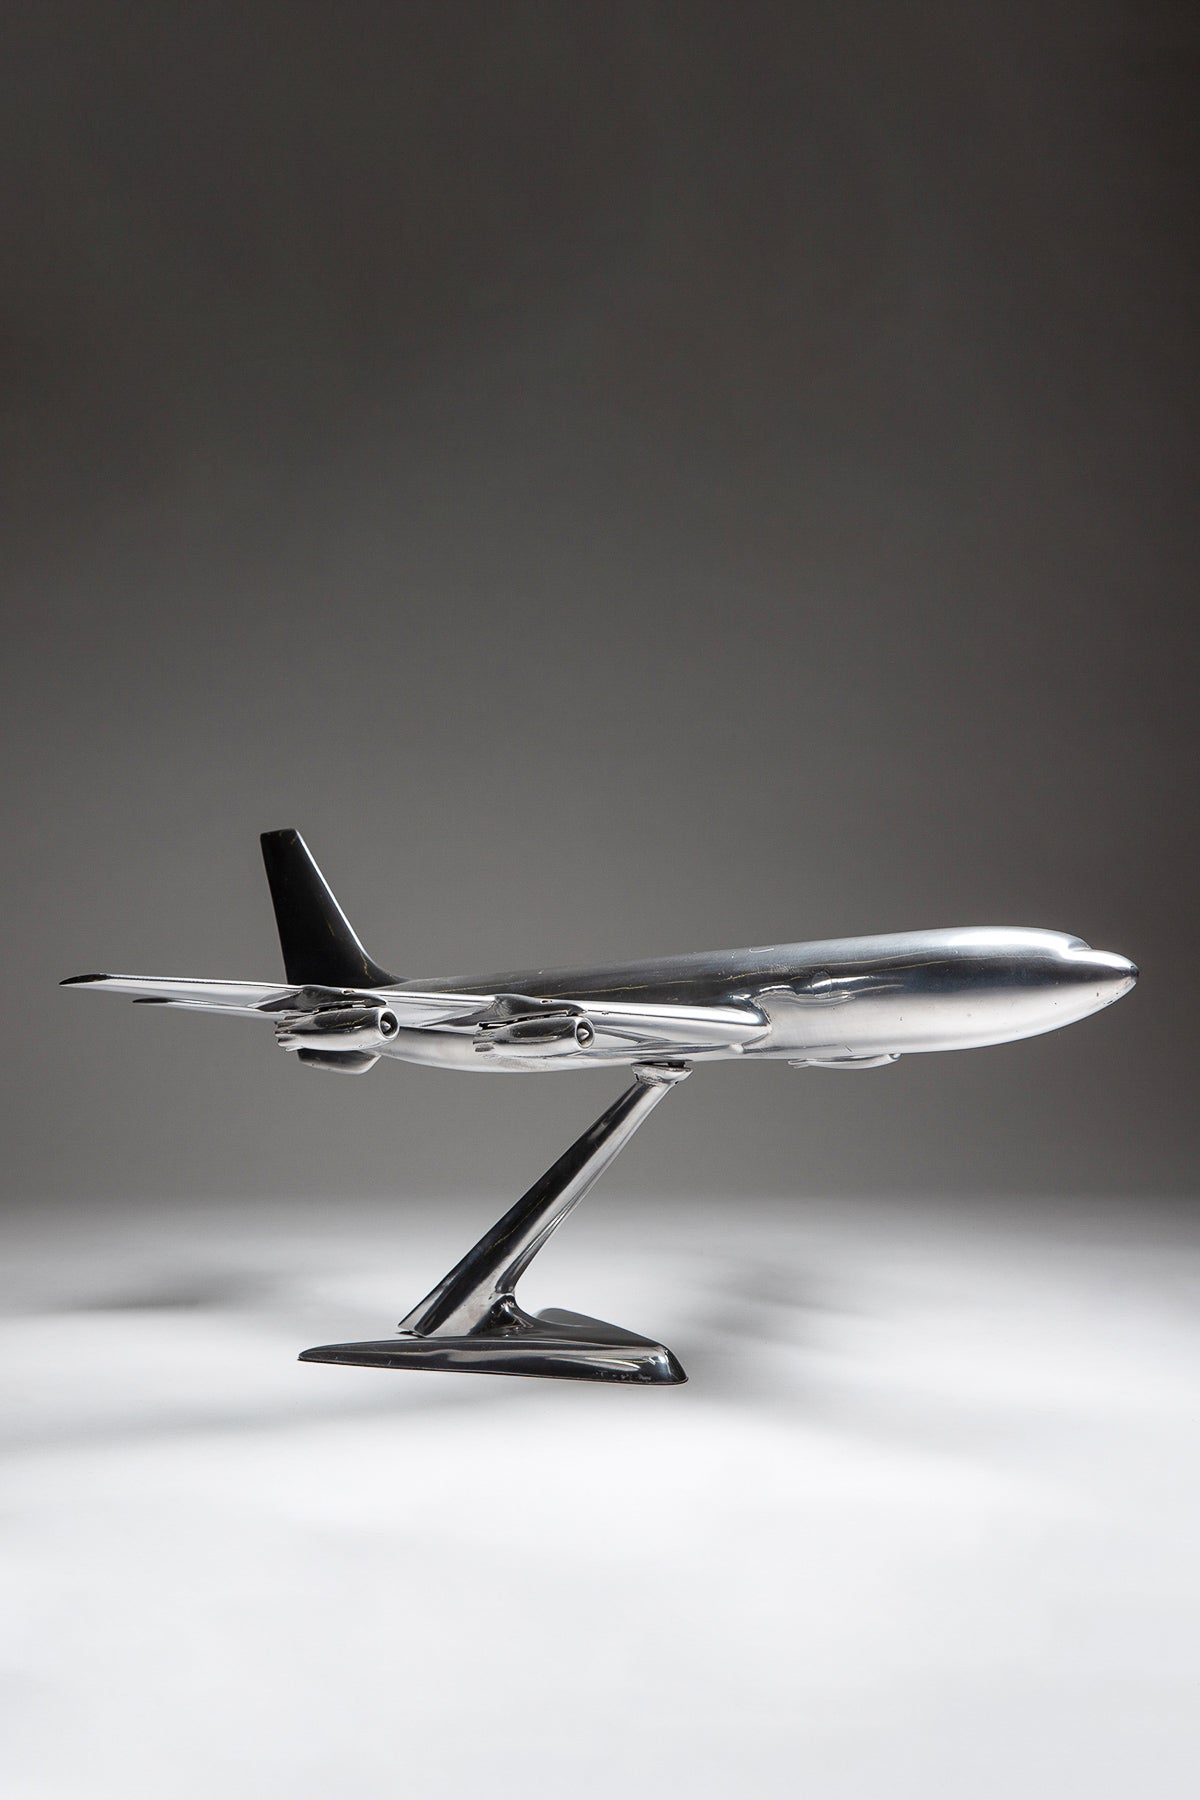 MAXFIELD PRIVATE COLLECTION | ROYAL AIR FORCE 707 MODEL AIRPLANE